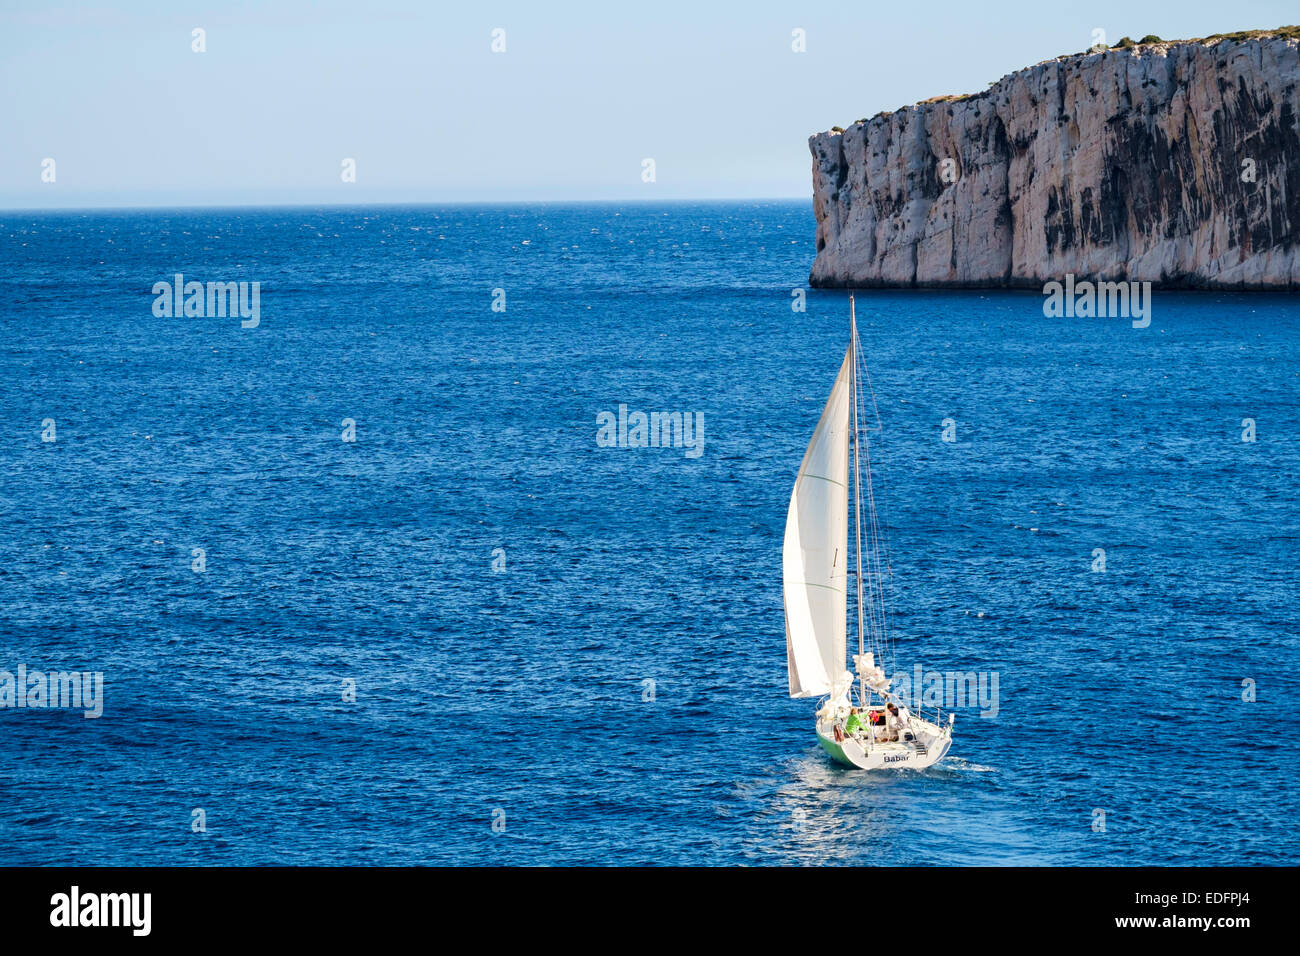 Aft (rear) view of small sailboat heading out to sea Stock Photo